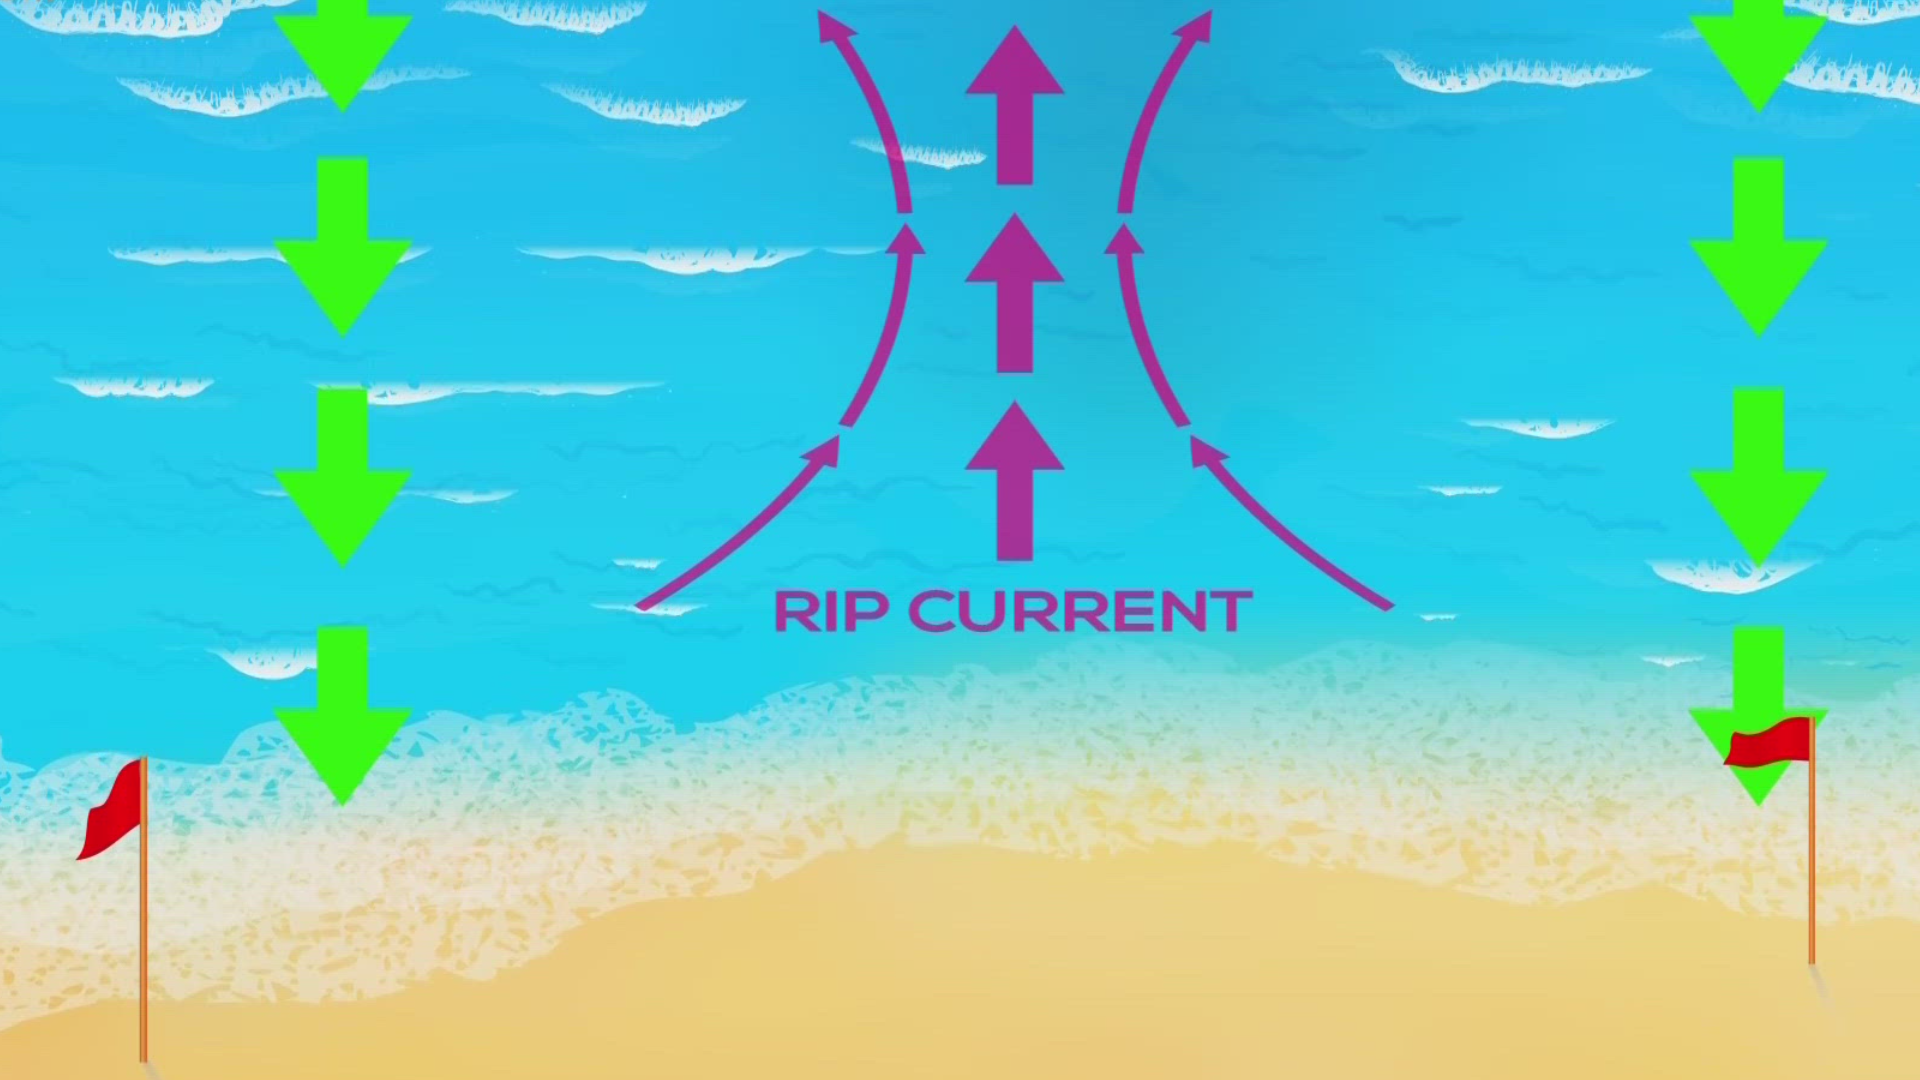 For those of you spending time at the beach this summer, be aware of the dangers of rip currents. Here's what to know.